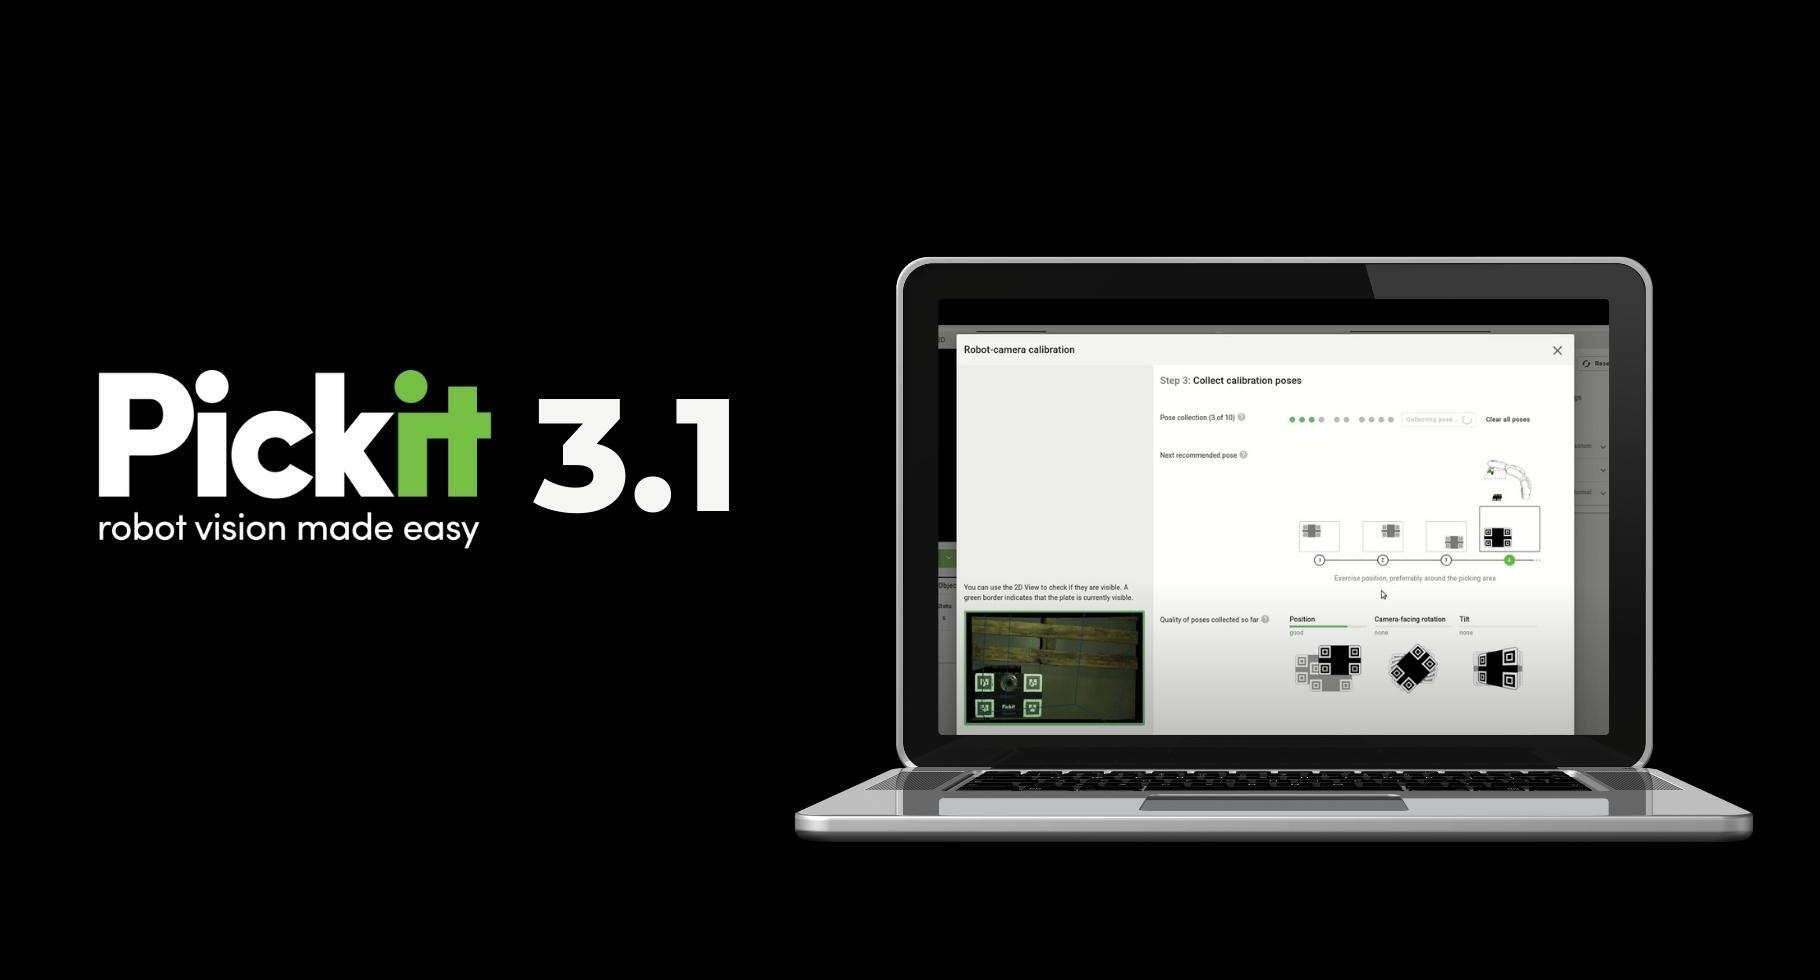 Welcome Pickit 3.1: New and enhanced functionality focused on user-friendliness and your productivity